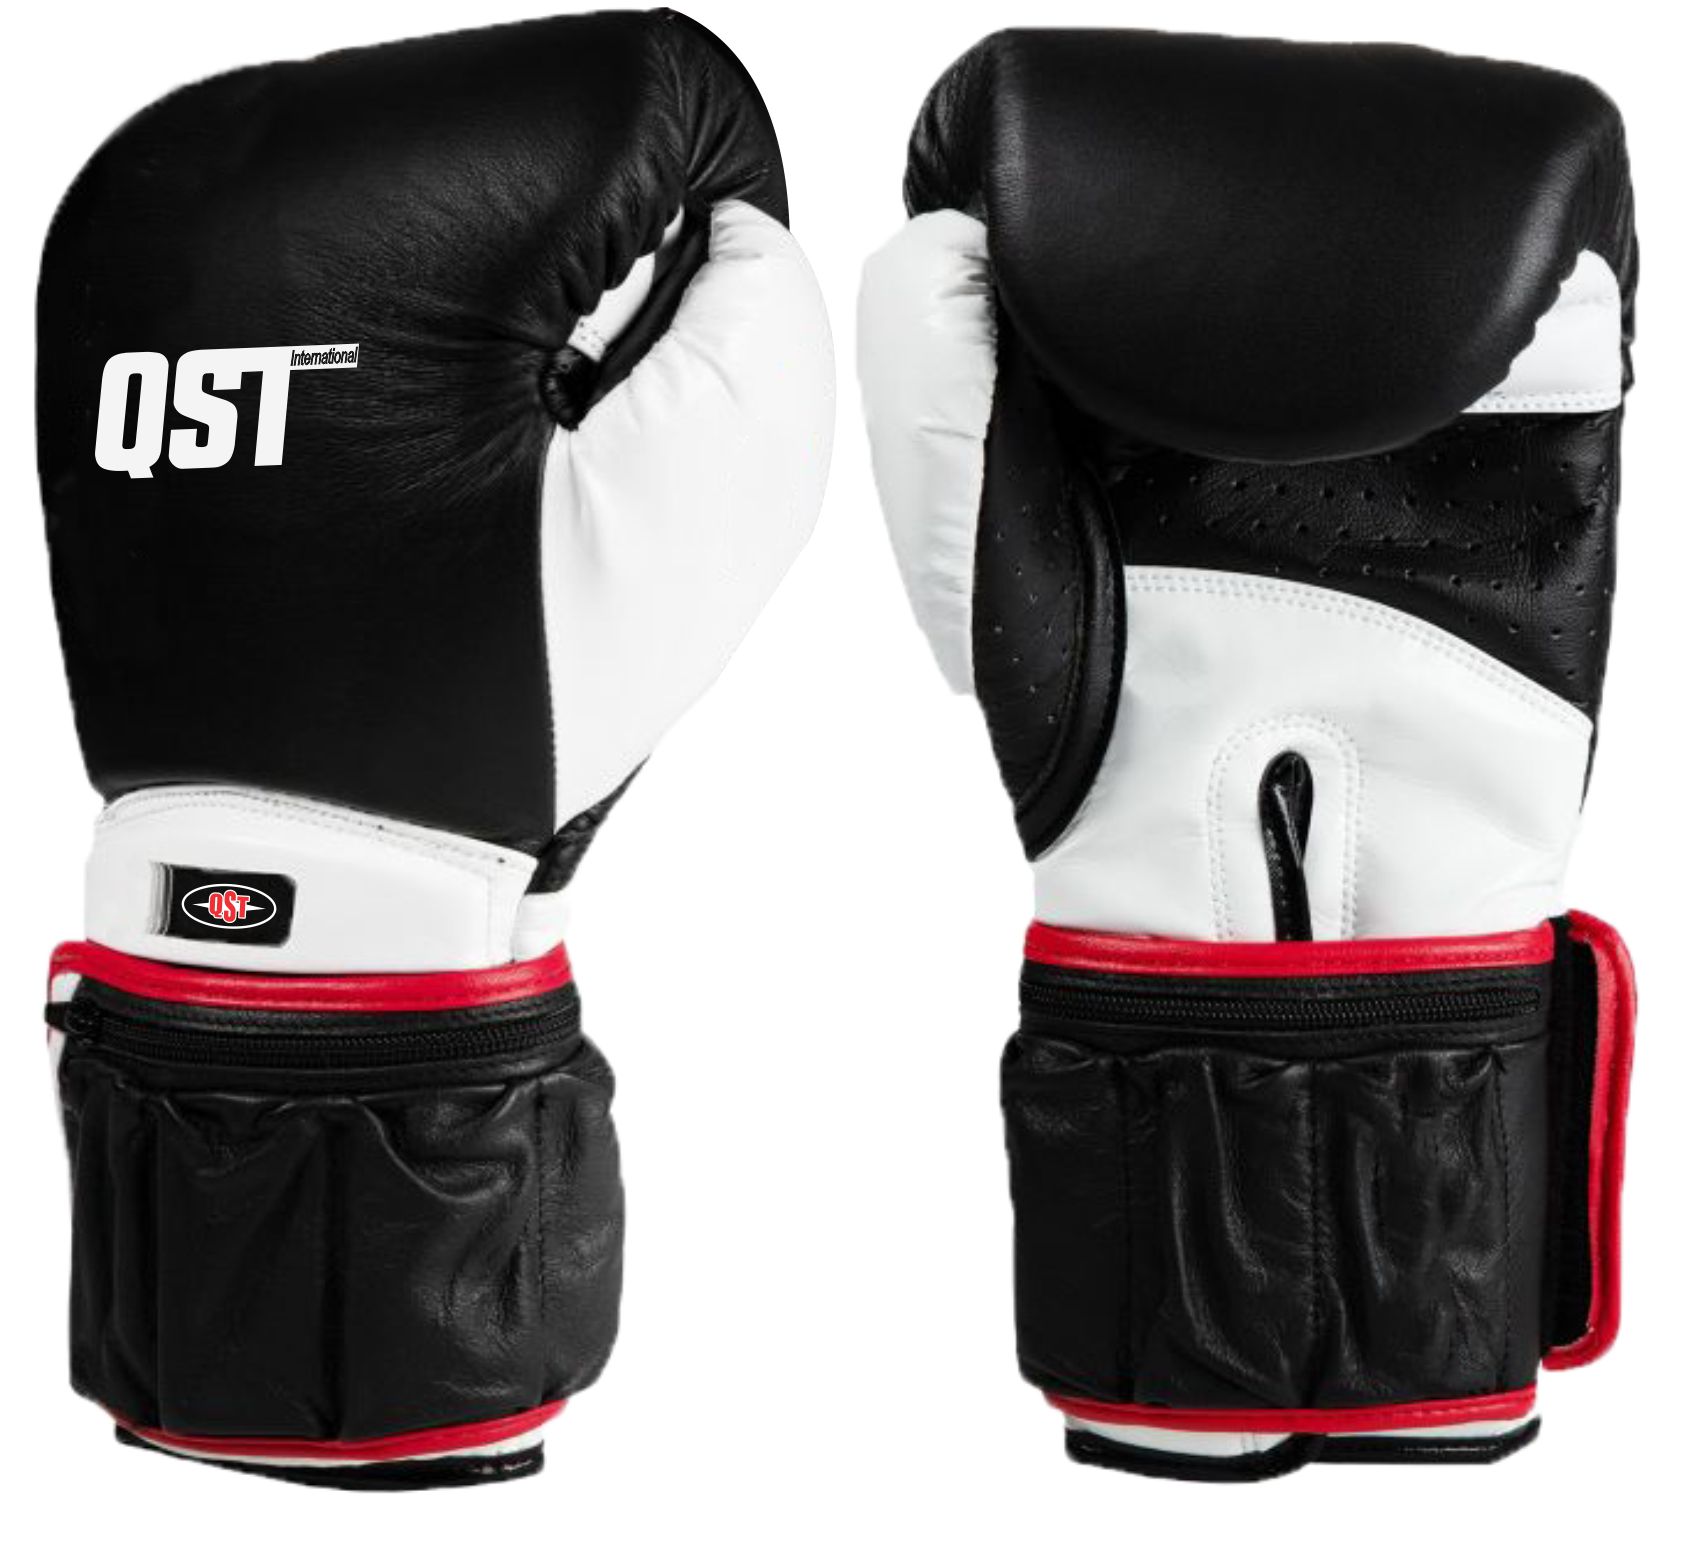 Professional Boxing Gloves - PRG-1516